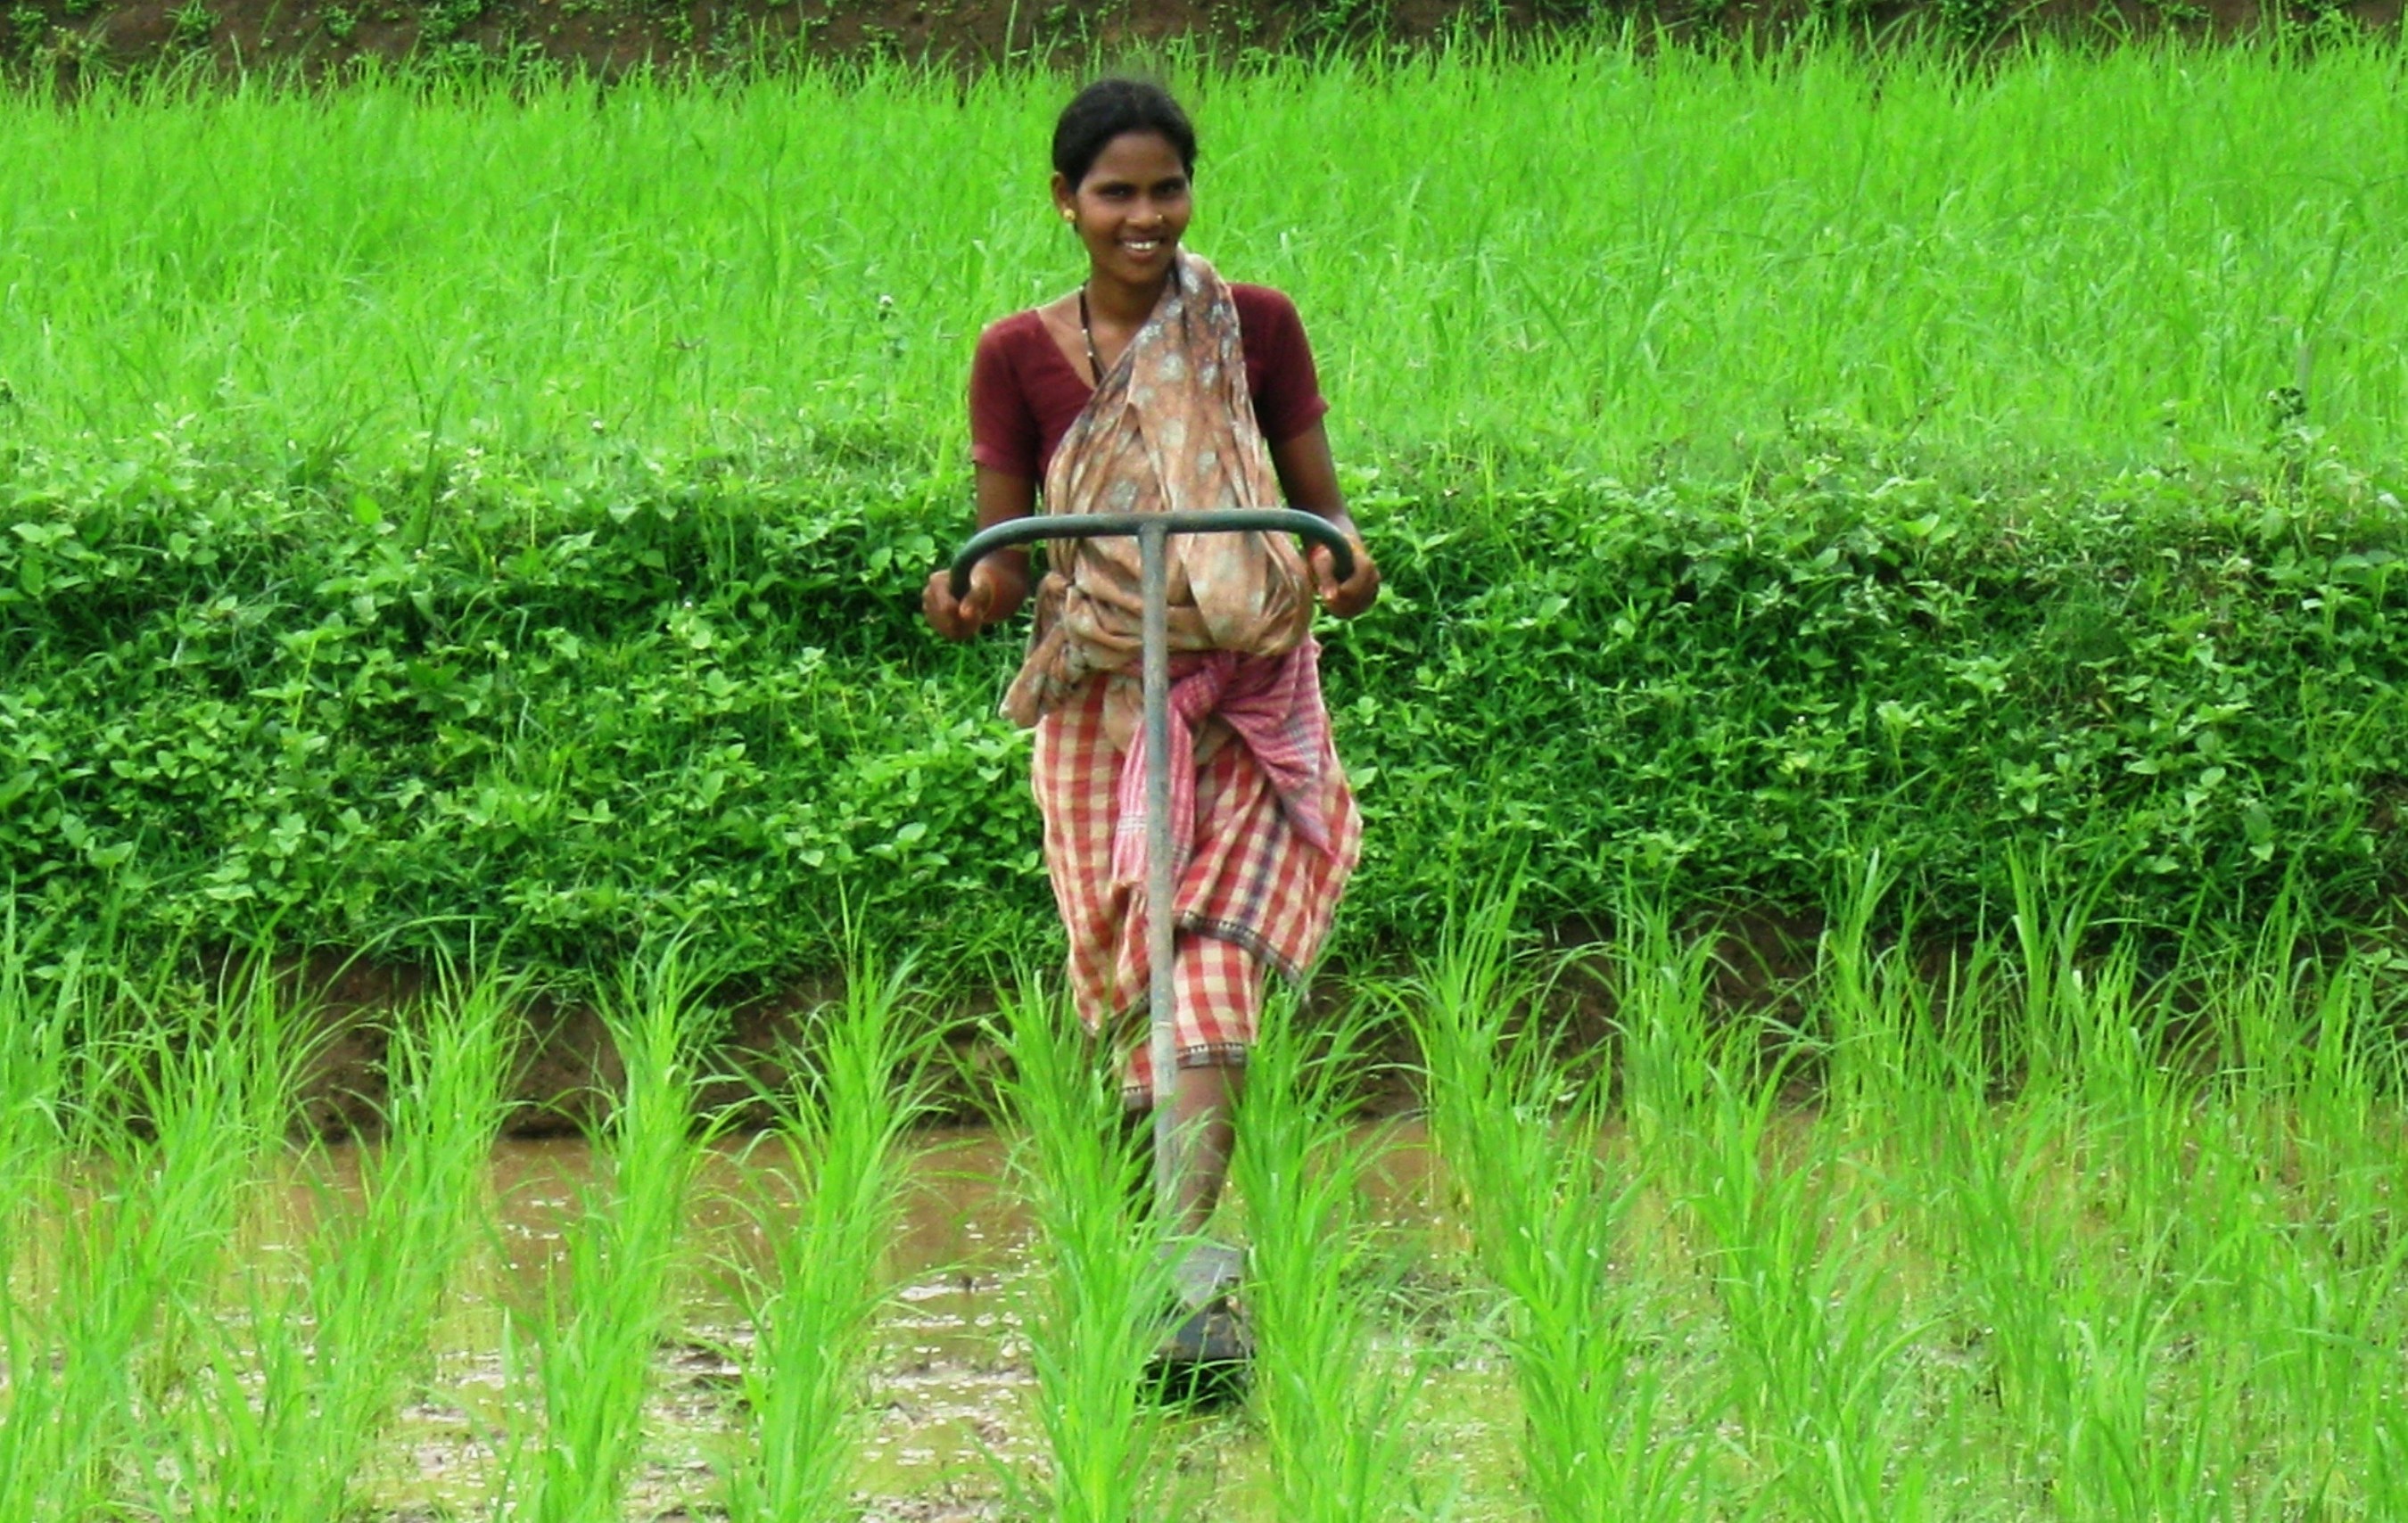 Reducing water use 20-50% and enabling women to weed fields in a fraction of the time (upright not bent over) with a simple weeder are two reasons why More Crop Per Drop is WaterSmart and WomenStrong.